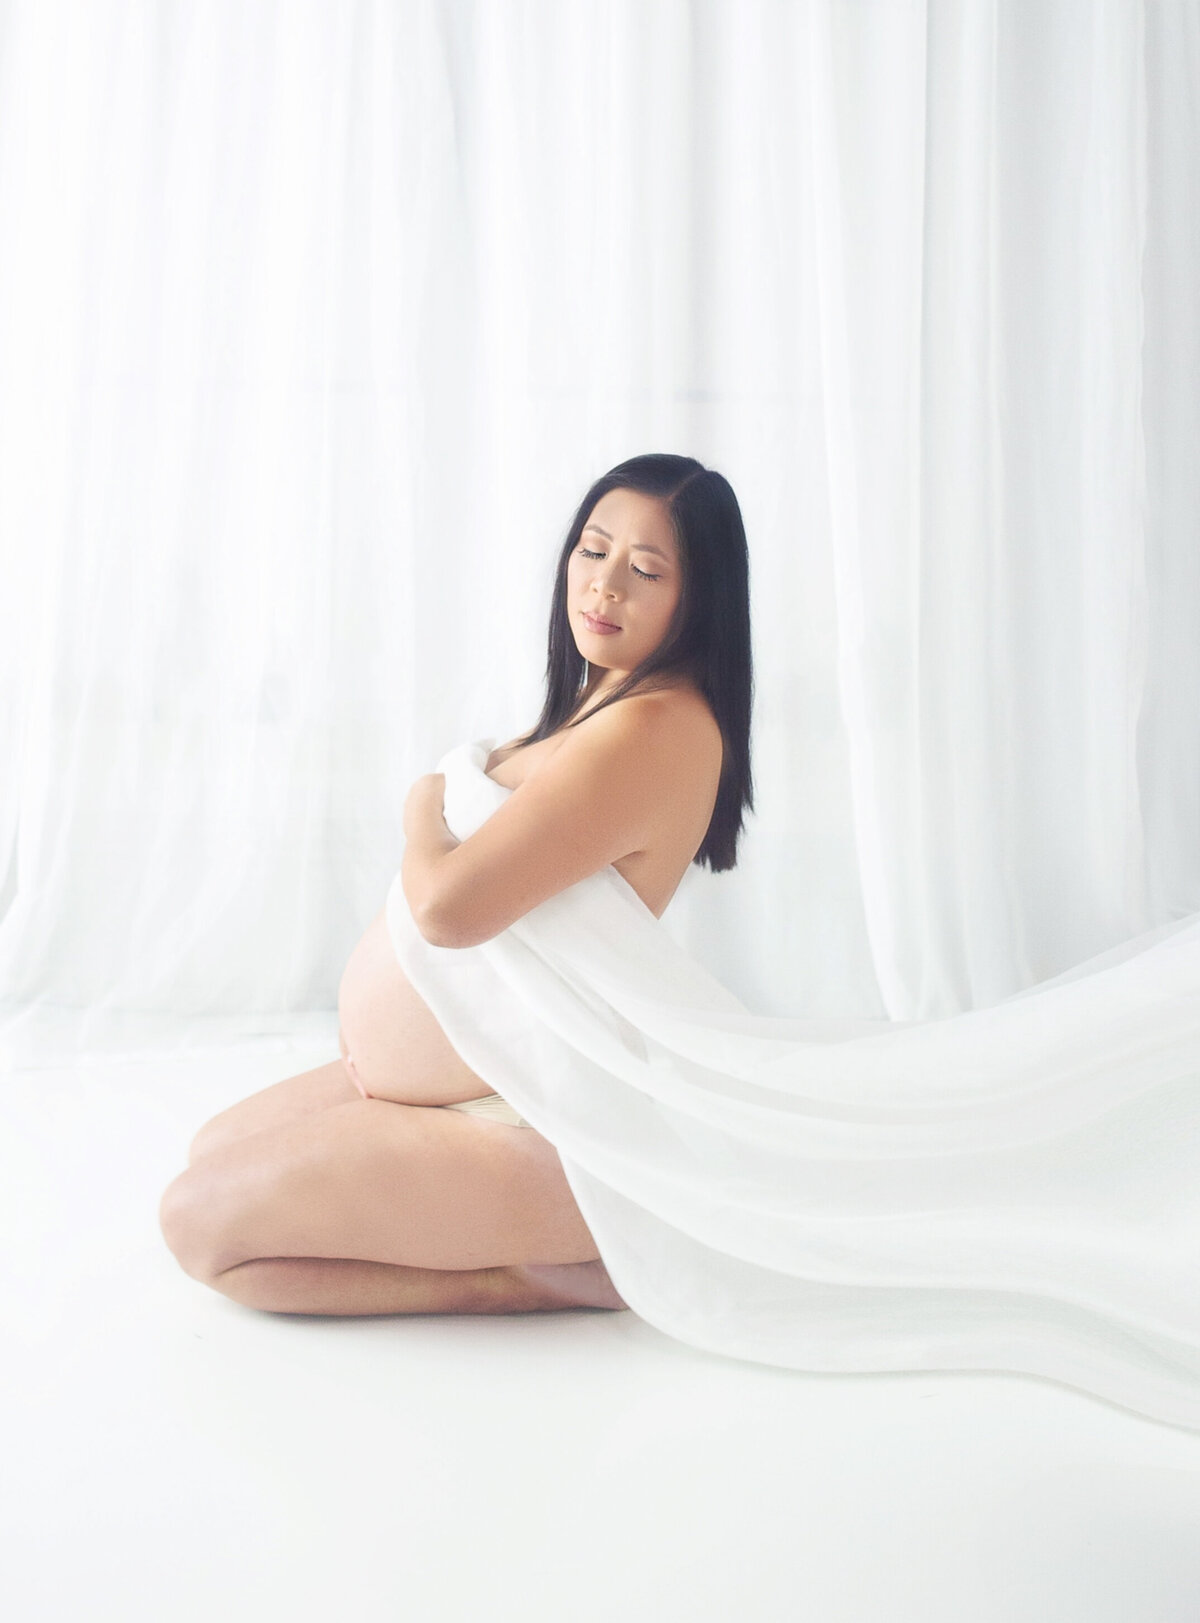 Women with white fabric draped over pregnant belly during maternity photoshoot in Mount Juliet Tennessee photography studio